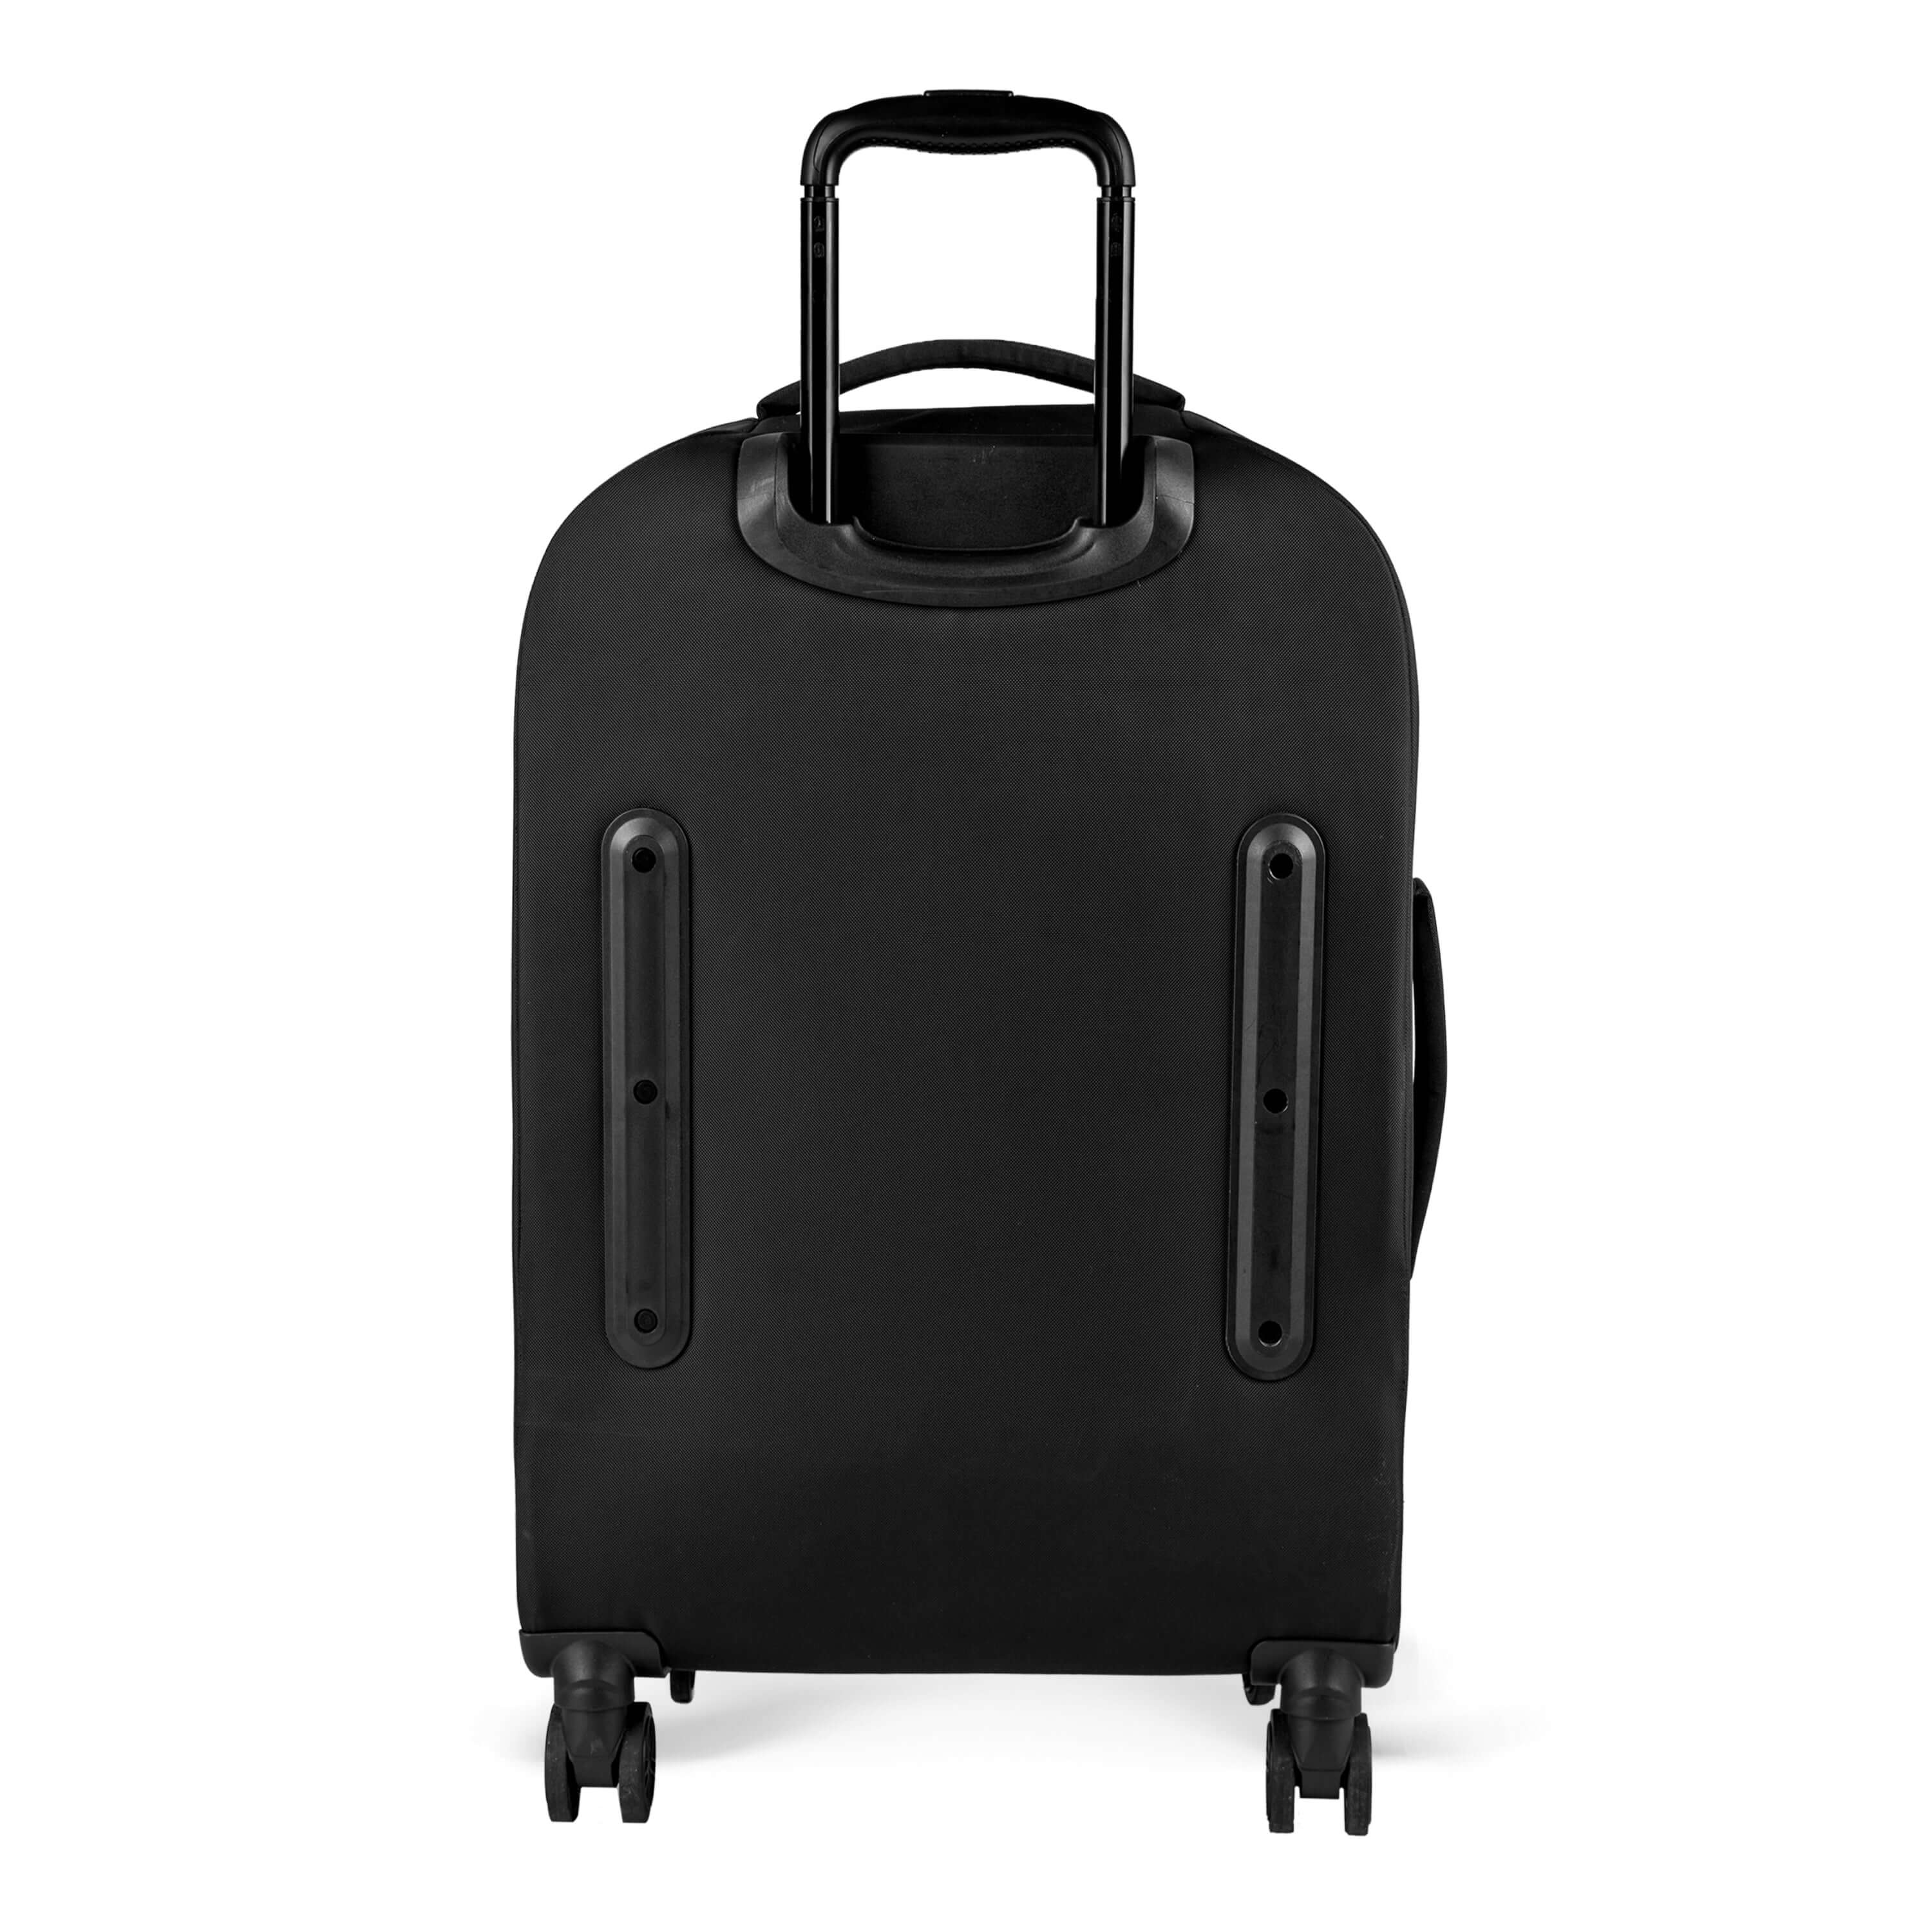 Flat view of the back of Sherpani’s Anti-Theft luggage, the Hemisphere. The back of the suitcase is black and has vegan leather accents in black. On the top of the suitcase sits a retractable luggage handle. On the top and side sit two easy-access handles. At the bottom are four 36-degree spinner wheels for smooth rolling 